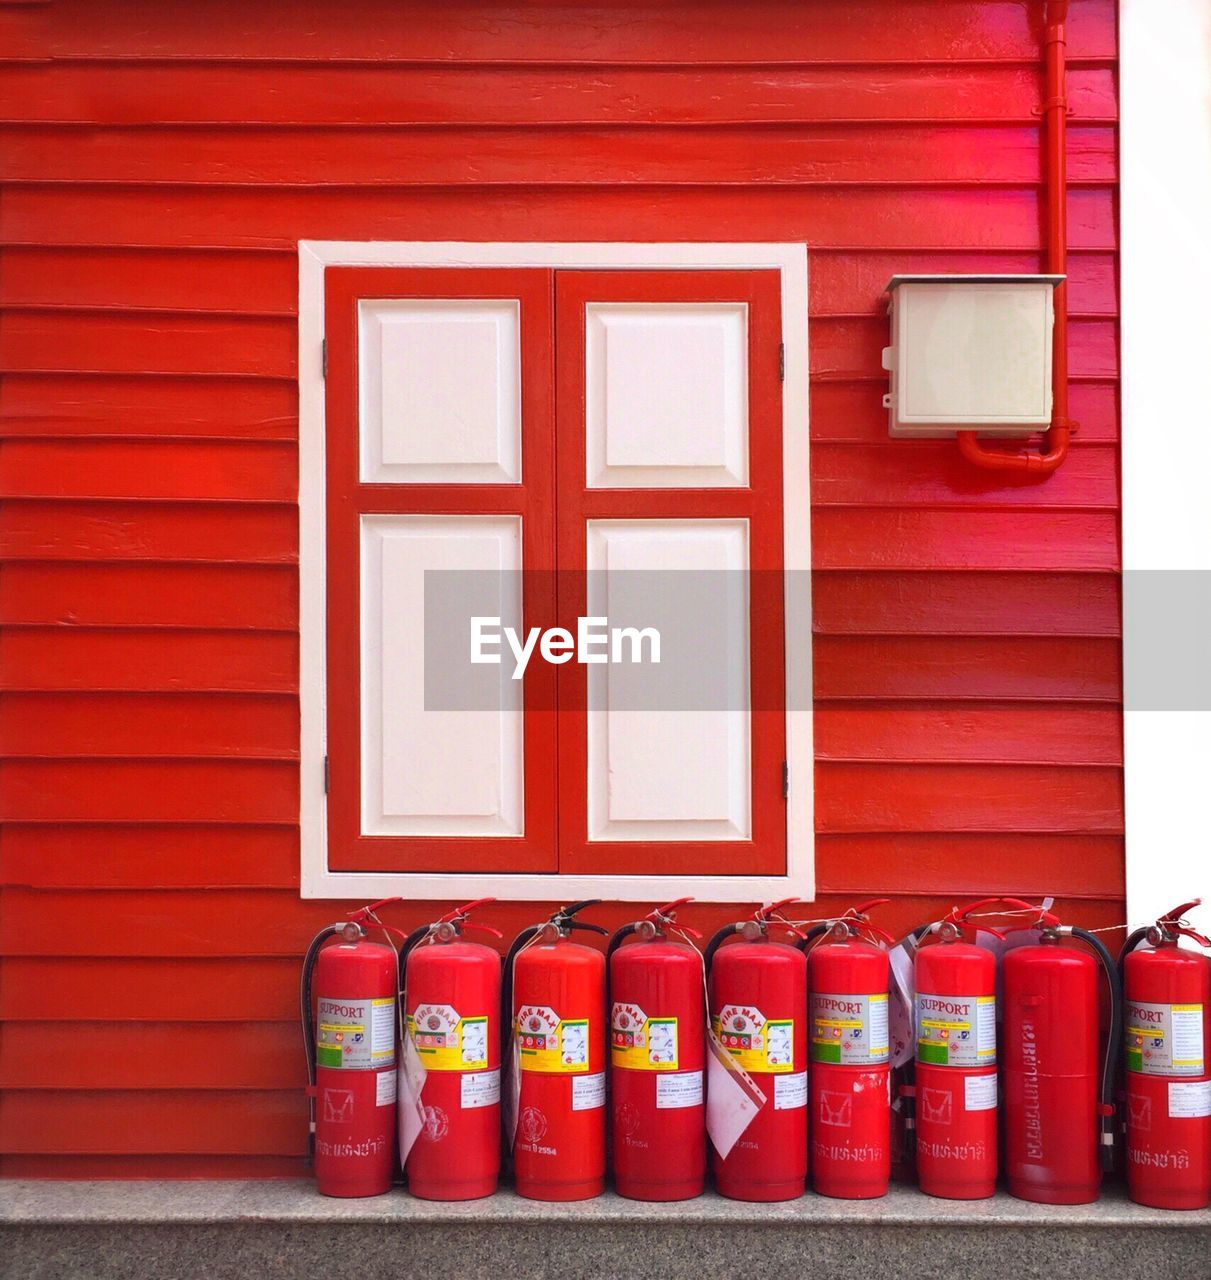 Fire extinguishers on retaining wall by